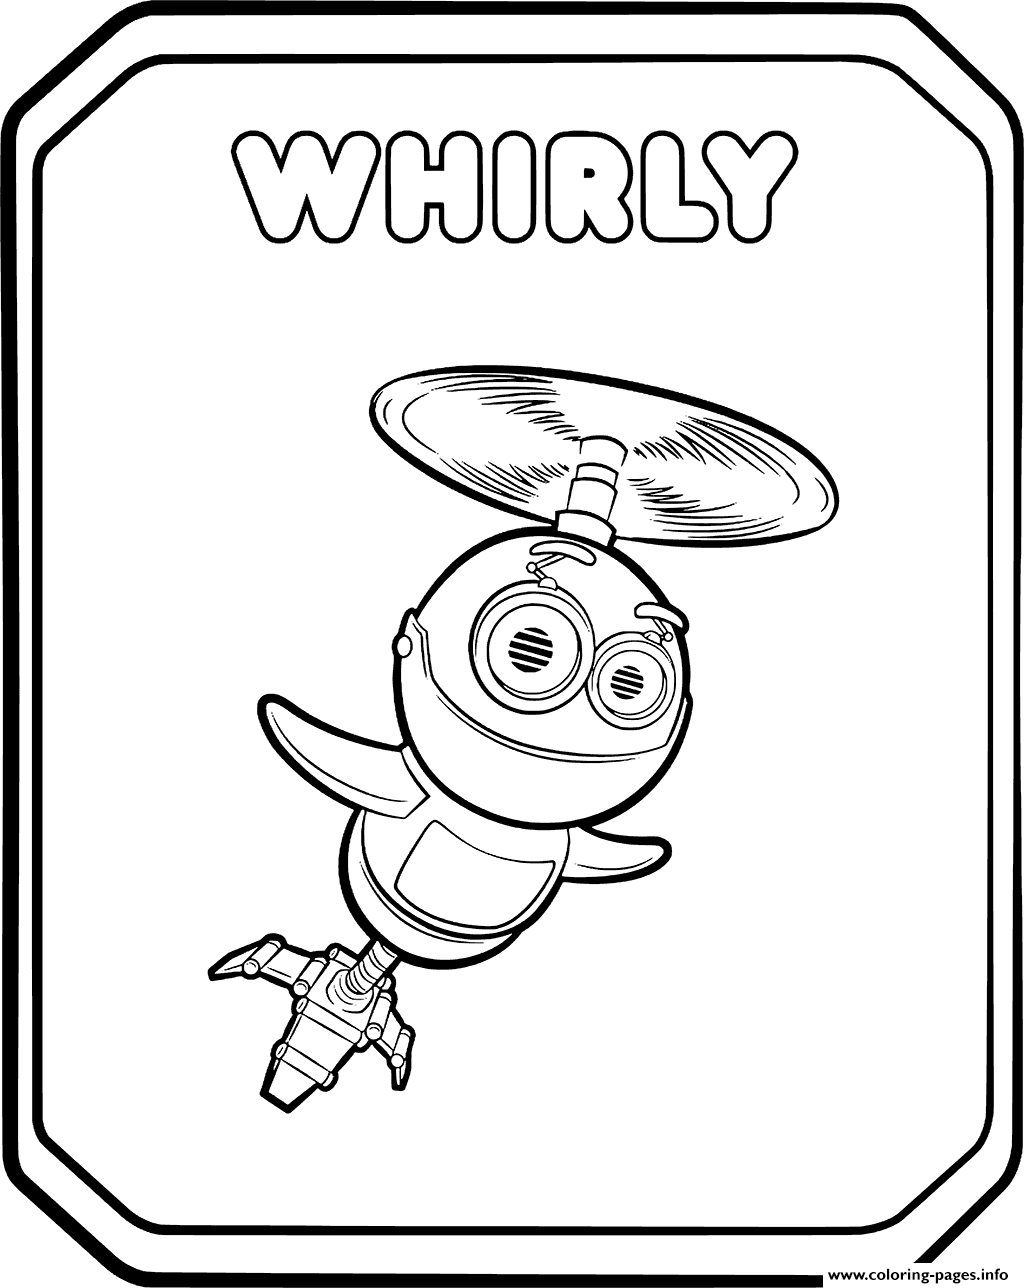 Rusty Rivets Flying Robot coloring